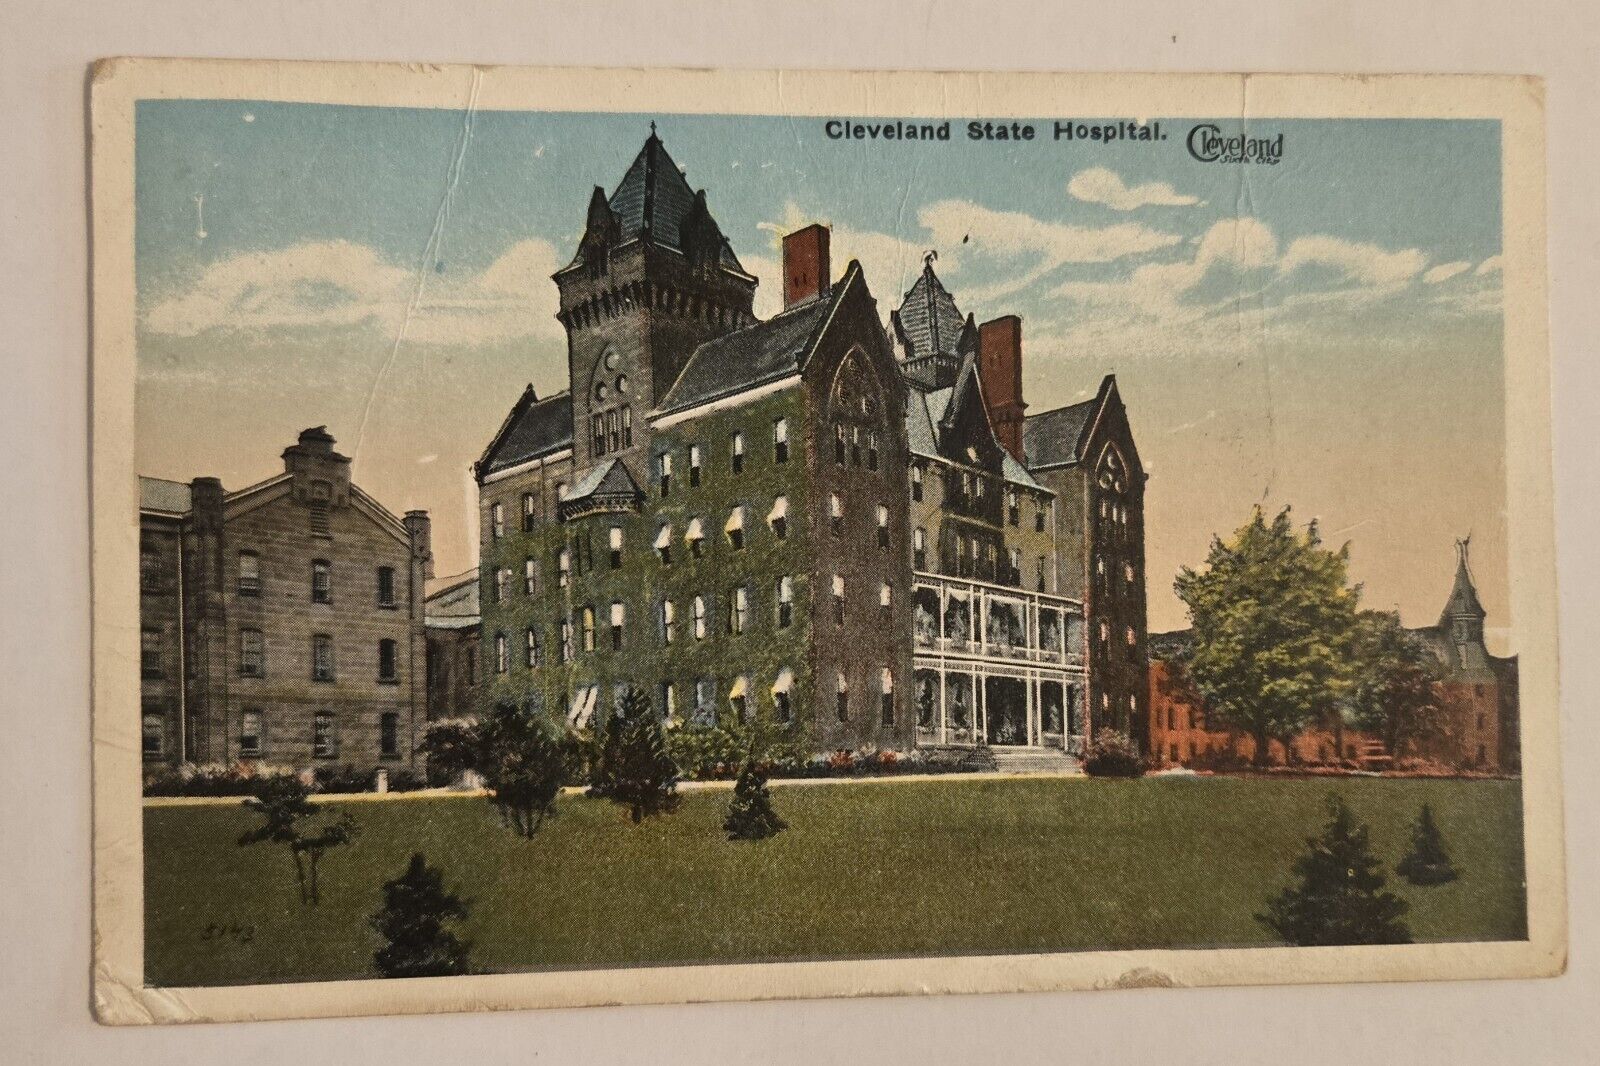 Used Vintage Cleveland Ohio Cleveland State Hospital Postcard AS IS F21